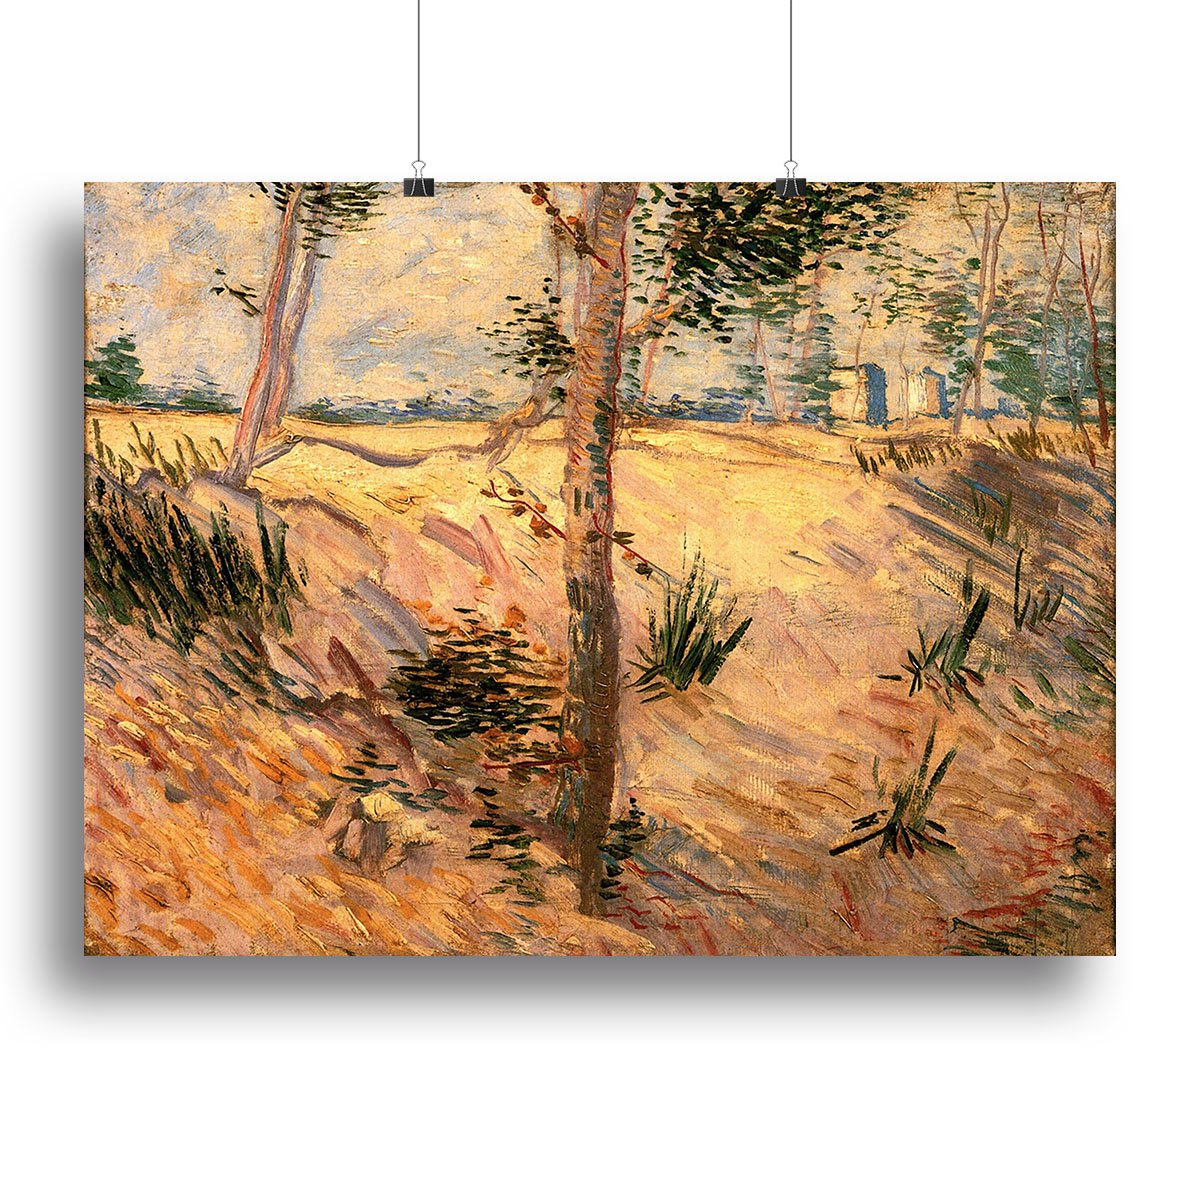 Trees in a Field on a Sunny Day by Van Gogh Canvas Print or Poster